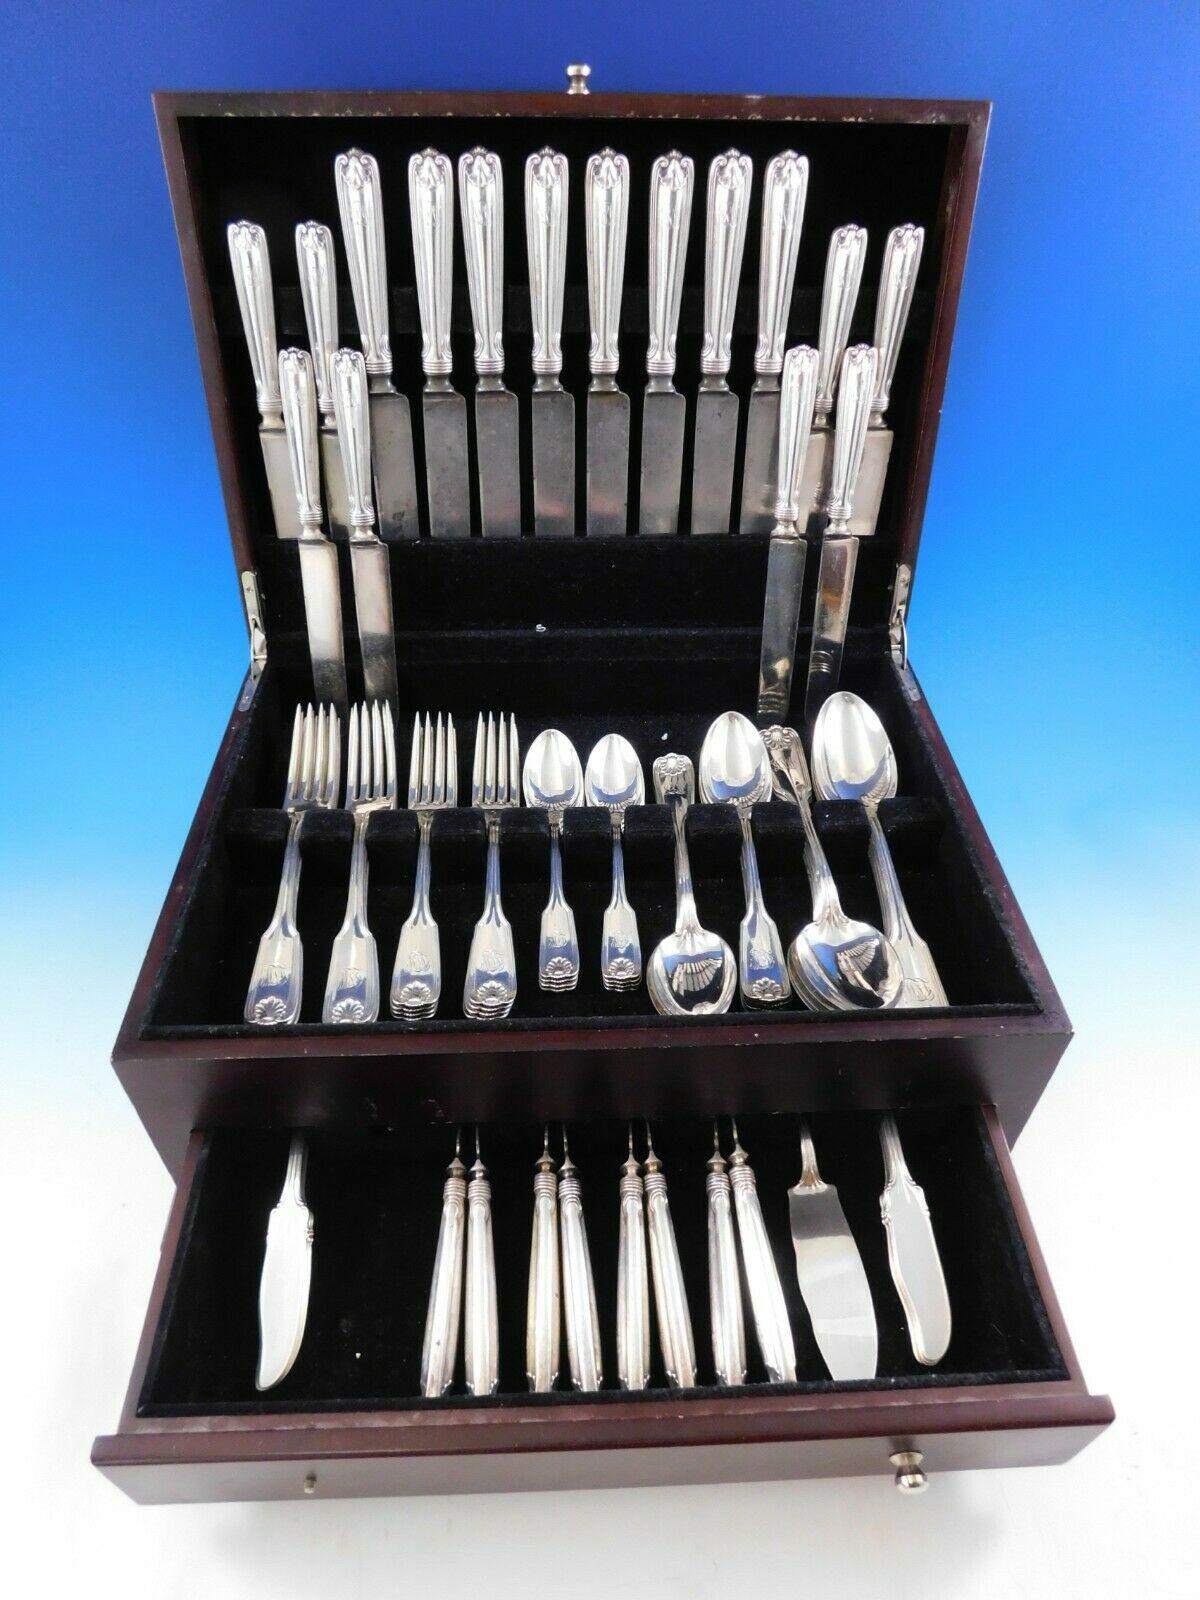 Vintage Benjamin Franklin by Towle sterling silver flatware set, 73 pieces. This set includes:

8 dinner size knives, blunt, 9 3/4